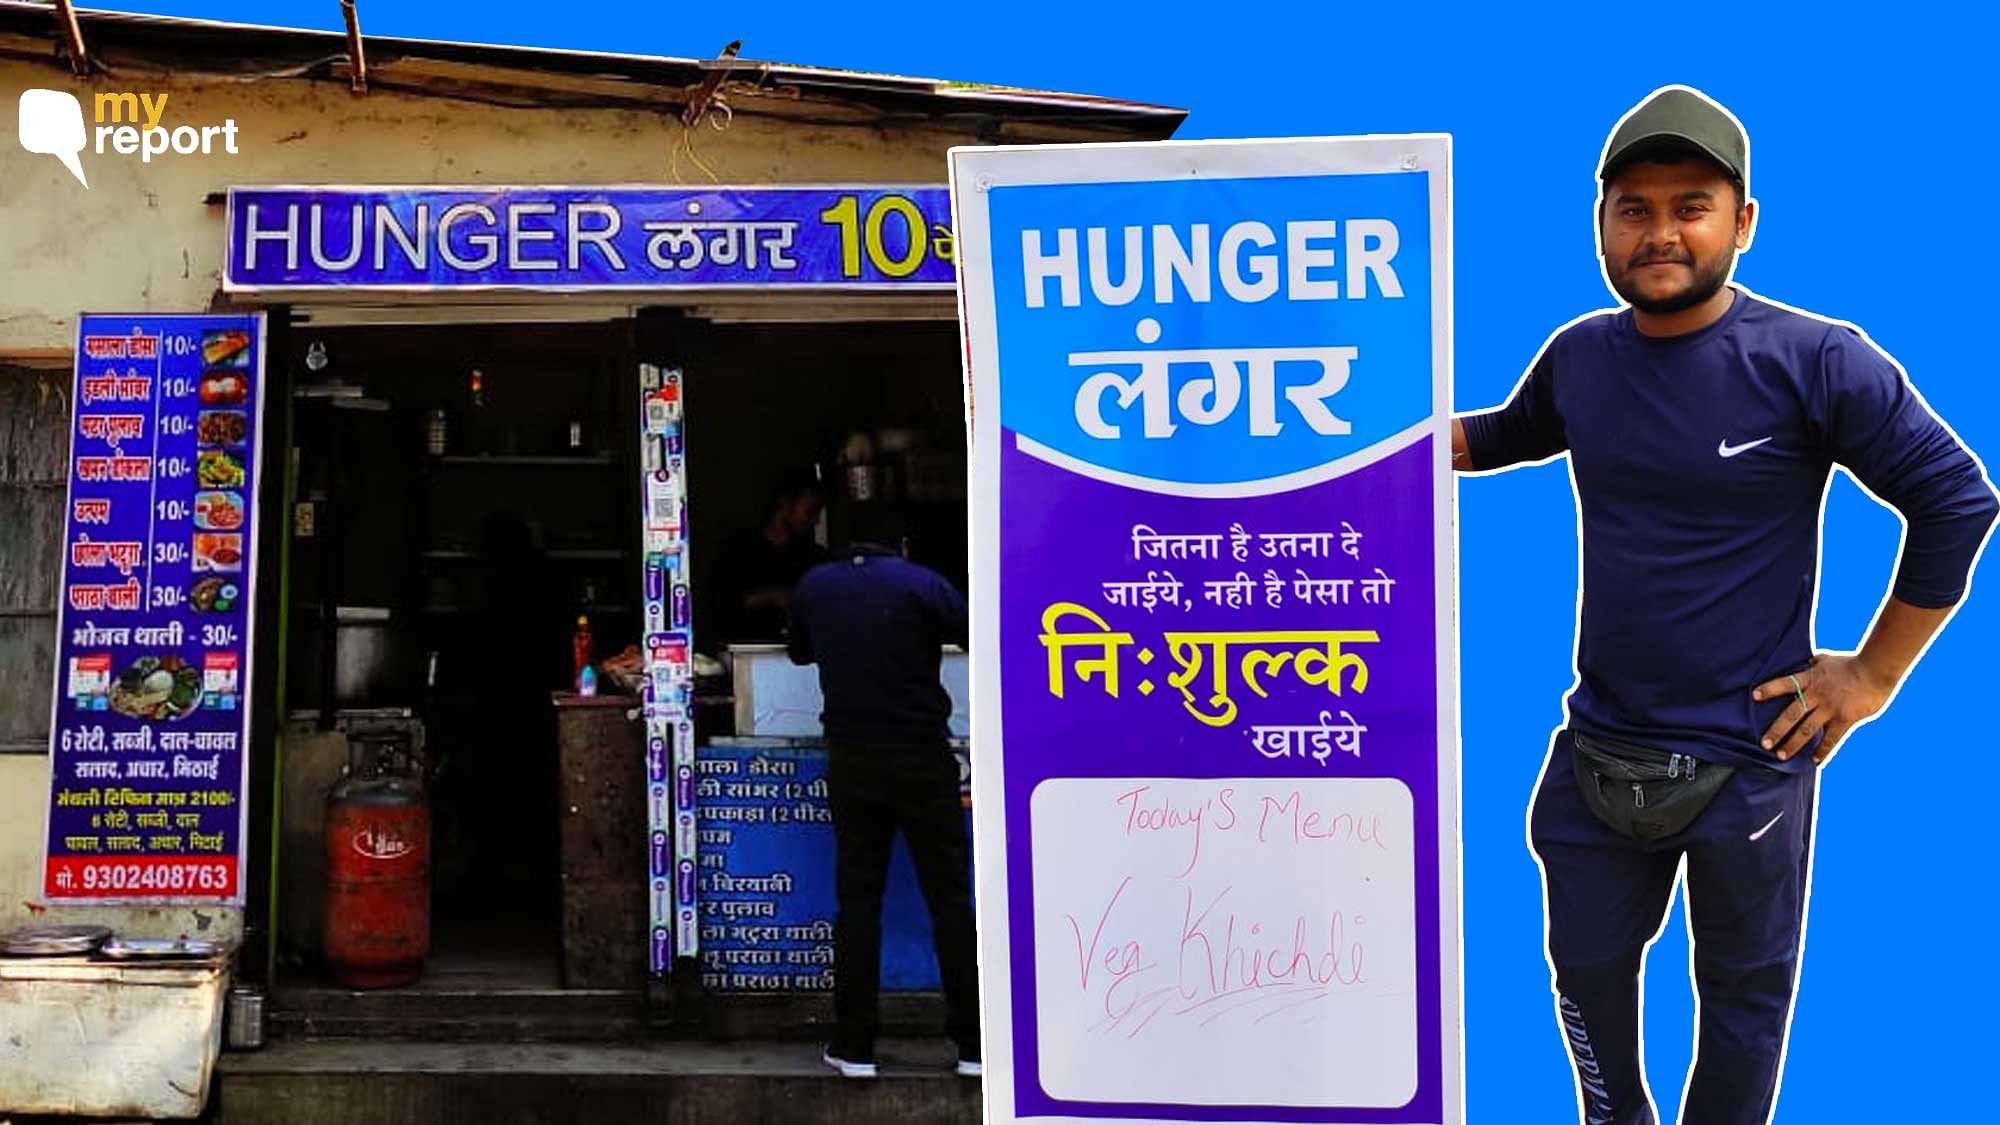 Shivam Soni from Indore has started ‘Hunger Langar’ to serve affordable food to all.